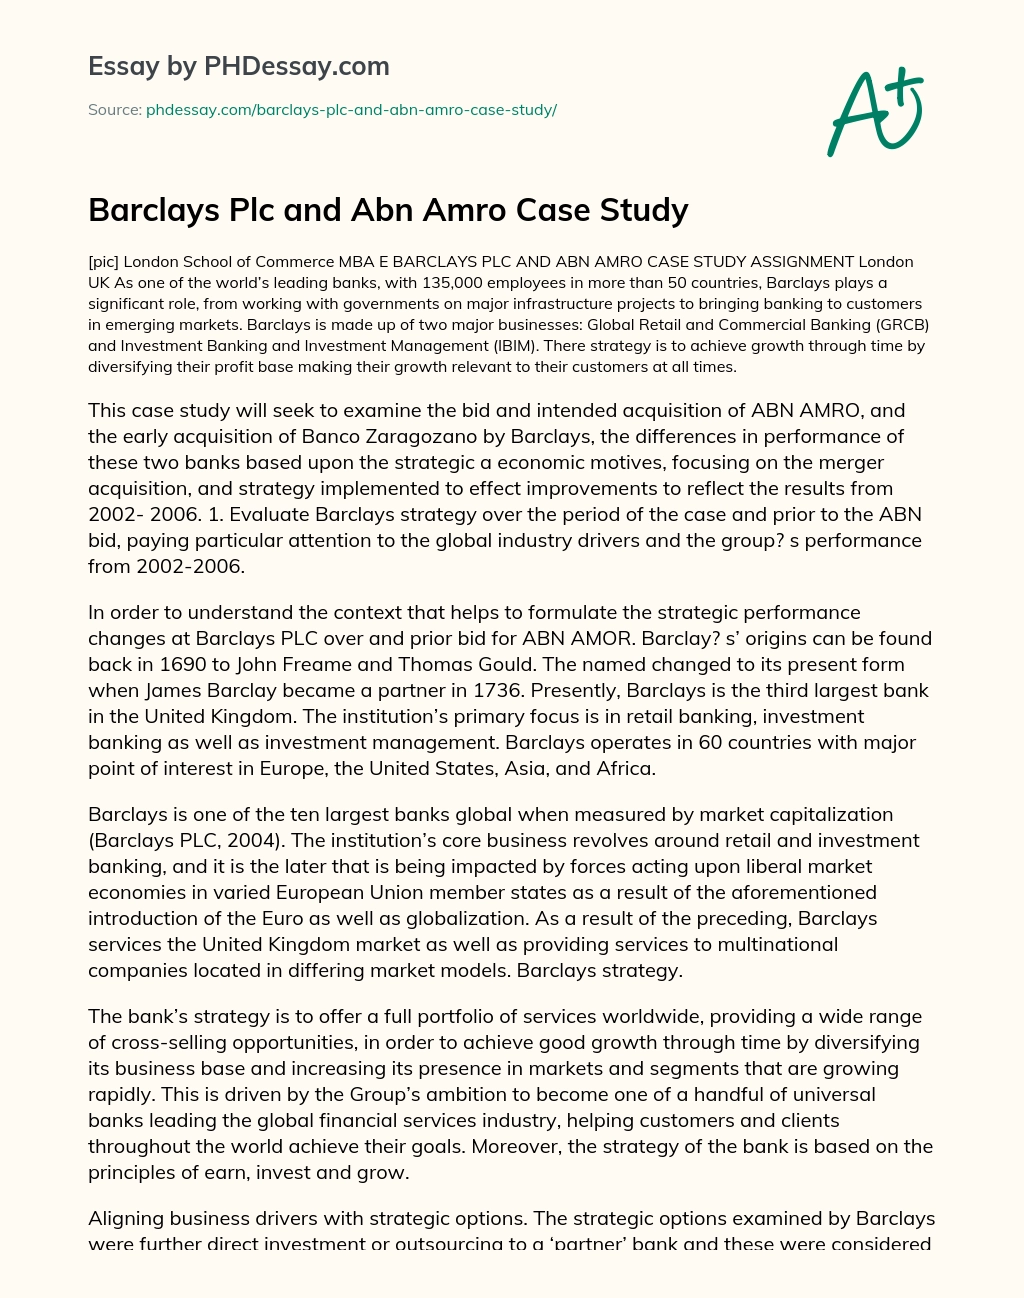 Barclays Plc and Abn Amro Case Study essay